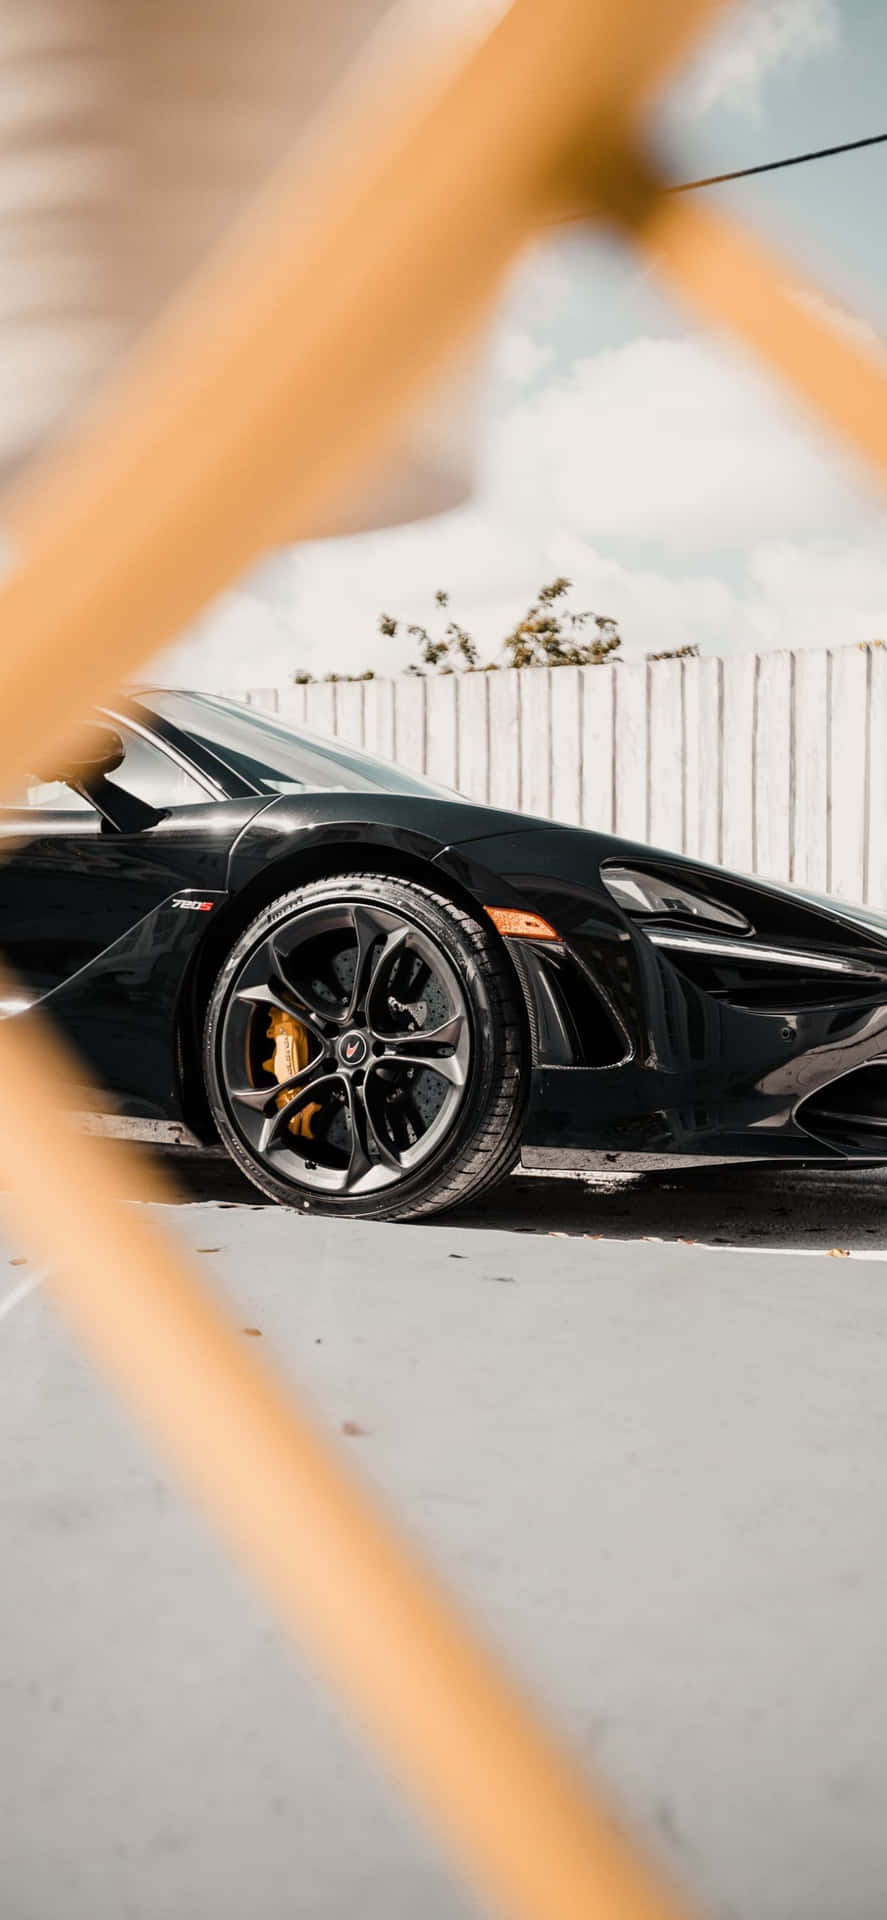 "Max out performance with the iPhone Xs Max and the McLaren 720s"